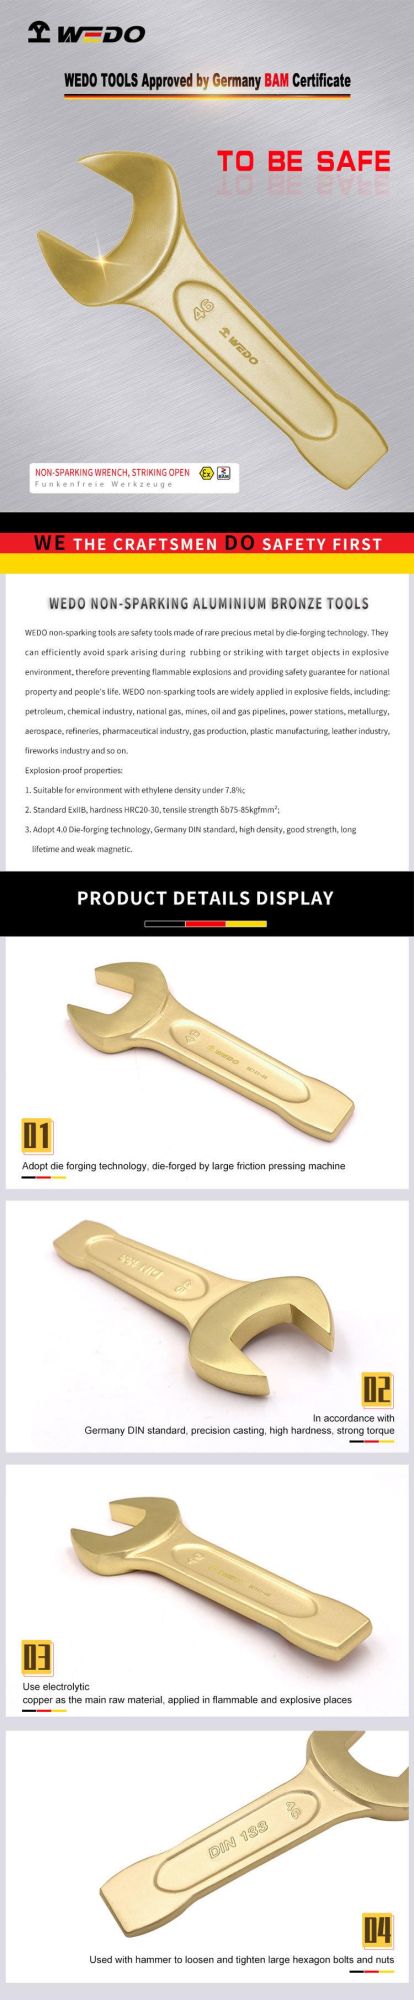 WEDO Hot Sale Non-Sparking Wrench Striking/Slogging Open Wrench Spanner Aluminium Bronze Metric&Imperial